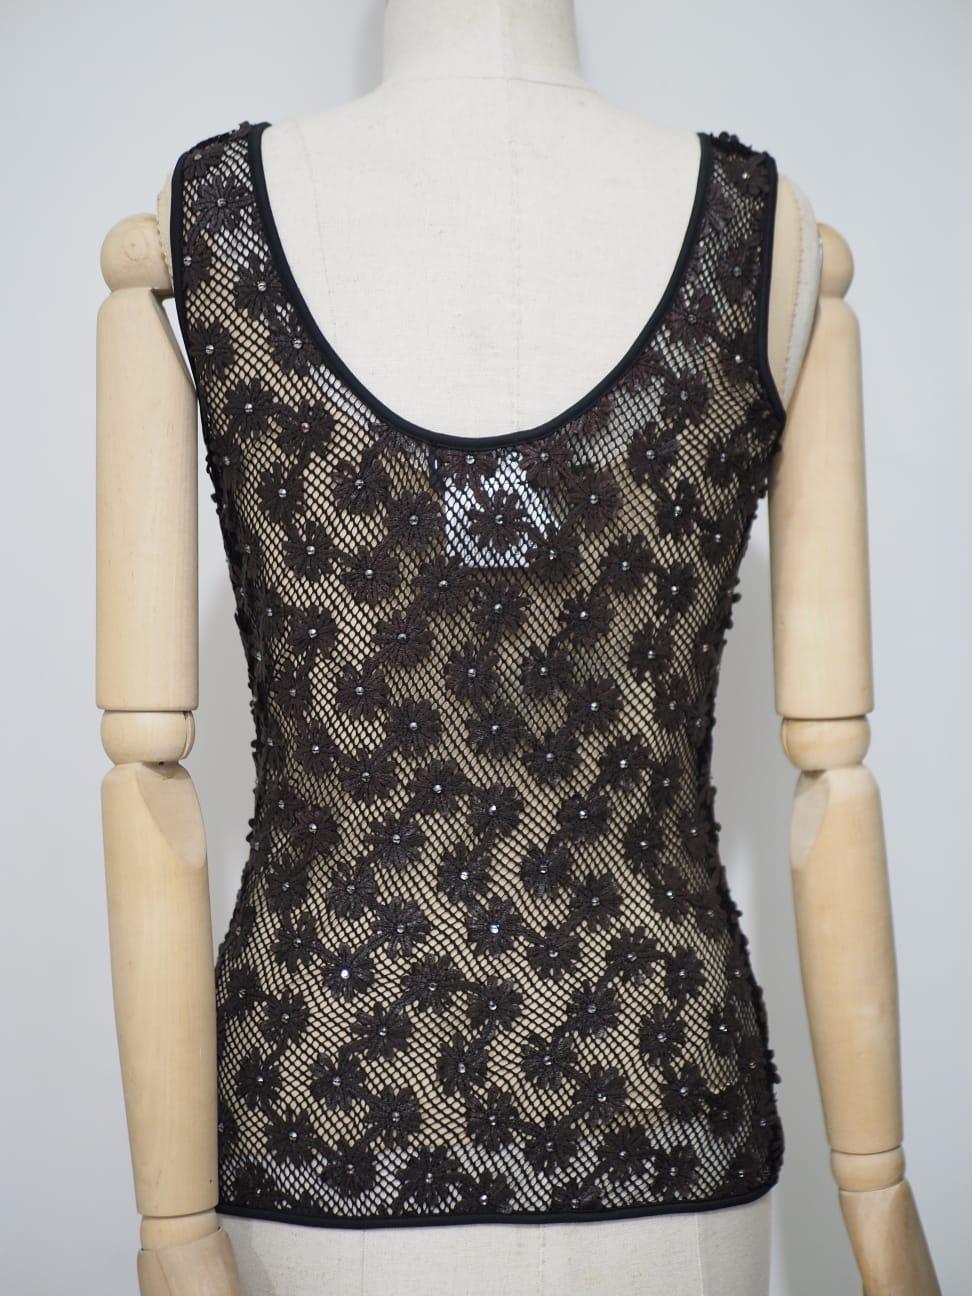 Chanel black flowers top embellished with Swarovski stones
Totally made in Italy in size 36